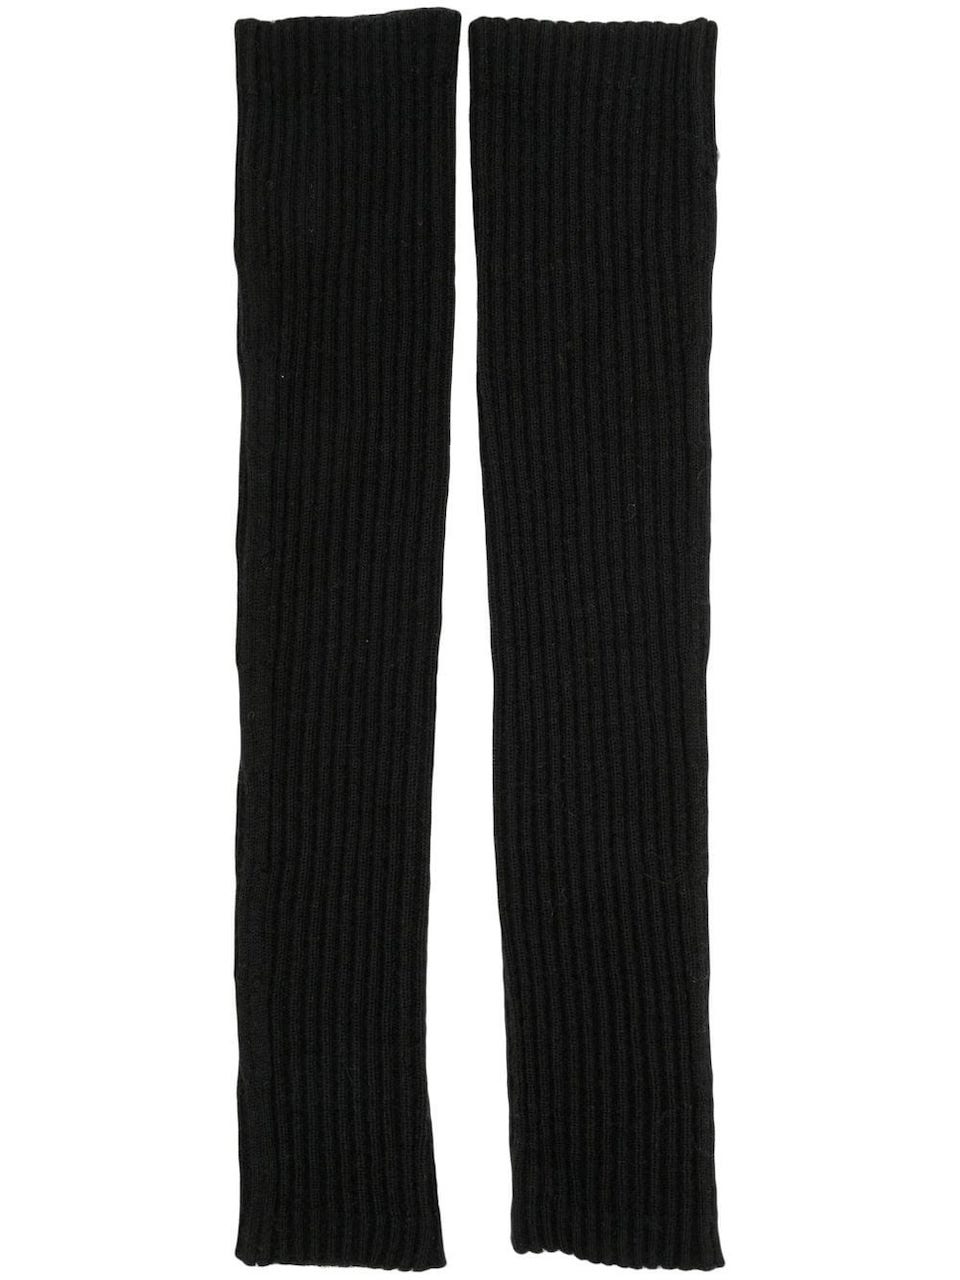 Best Leg Warmers to Shop Now